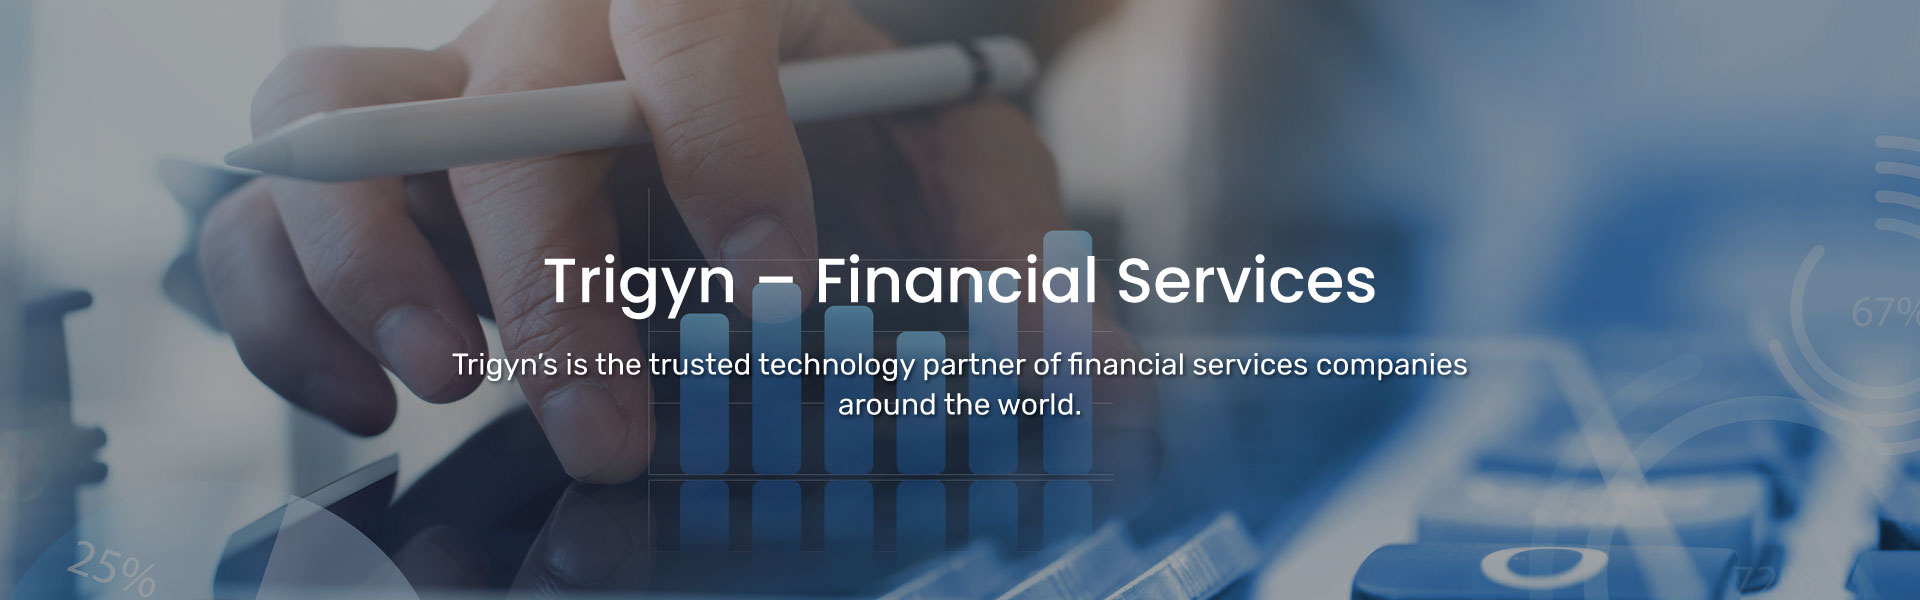 Trigyn’s Financial Services Capabilities